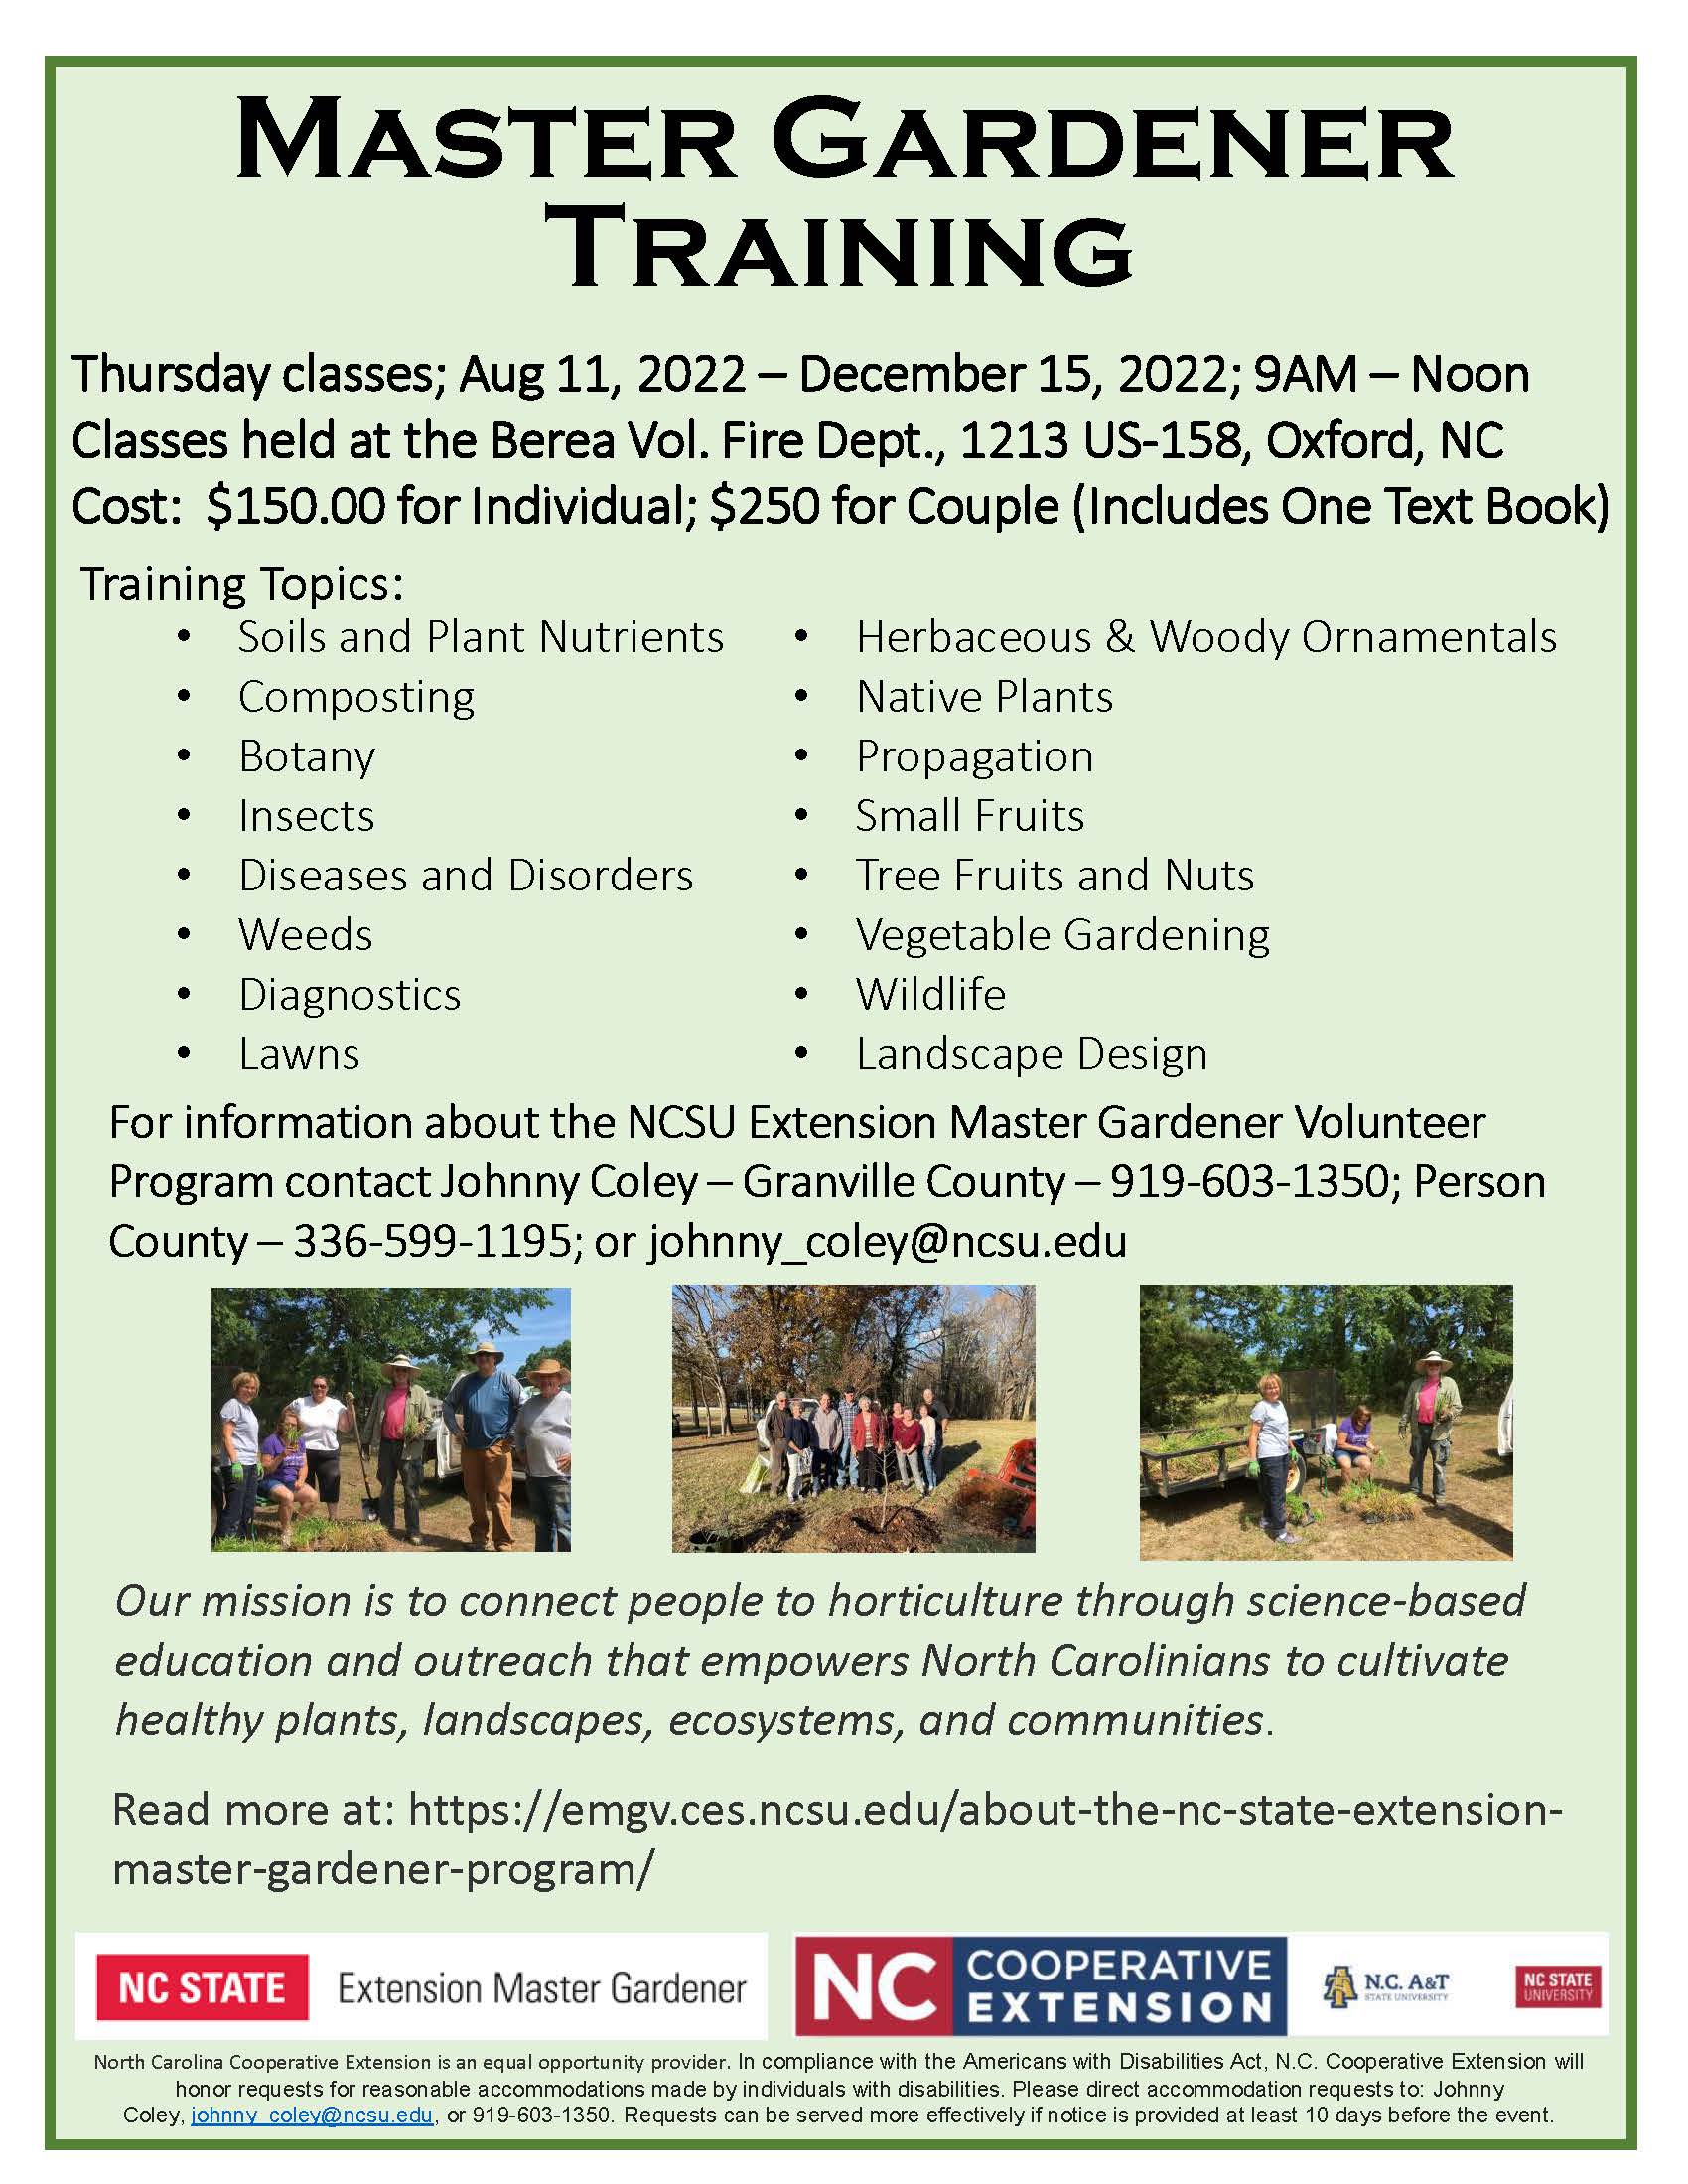 Master Gardener Training, Thursday classes; August 11, 2022 – December 15, 2022; 9 a.m. 12 noon. Classes held at the Berea Vol. Fire Dept., 1213 US-158 Oxford, NC Cost: $150.00 for individual; $250 for Couple (Includes One Text Book)